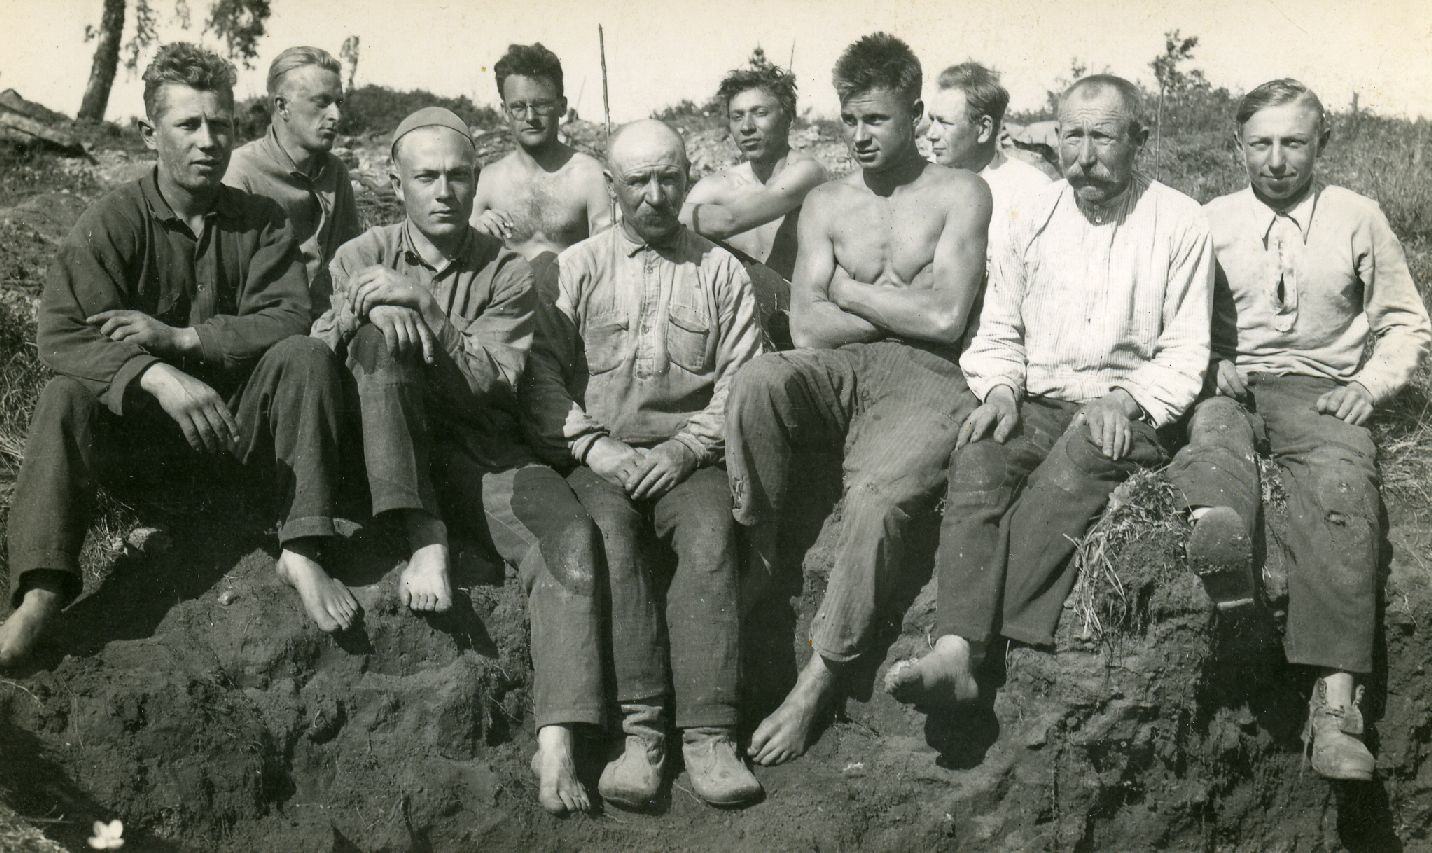 Heiti Talvik and other archaeological mines in Saaremaa [1931 v 1934]